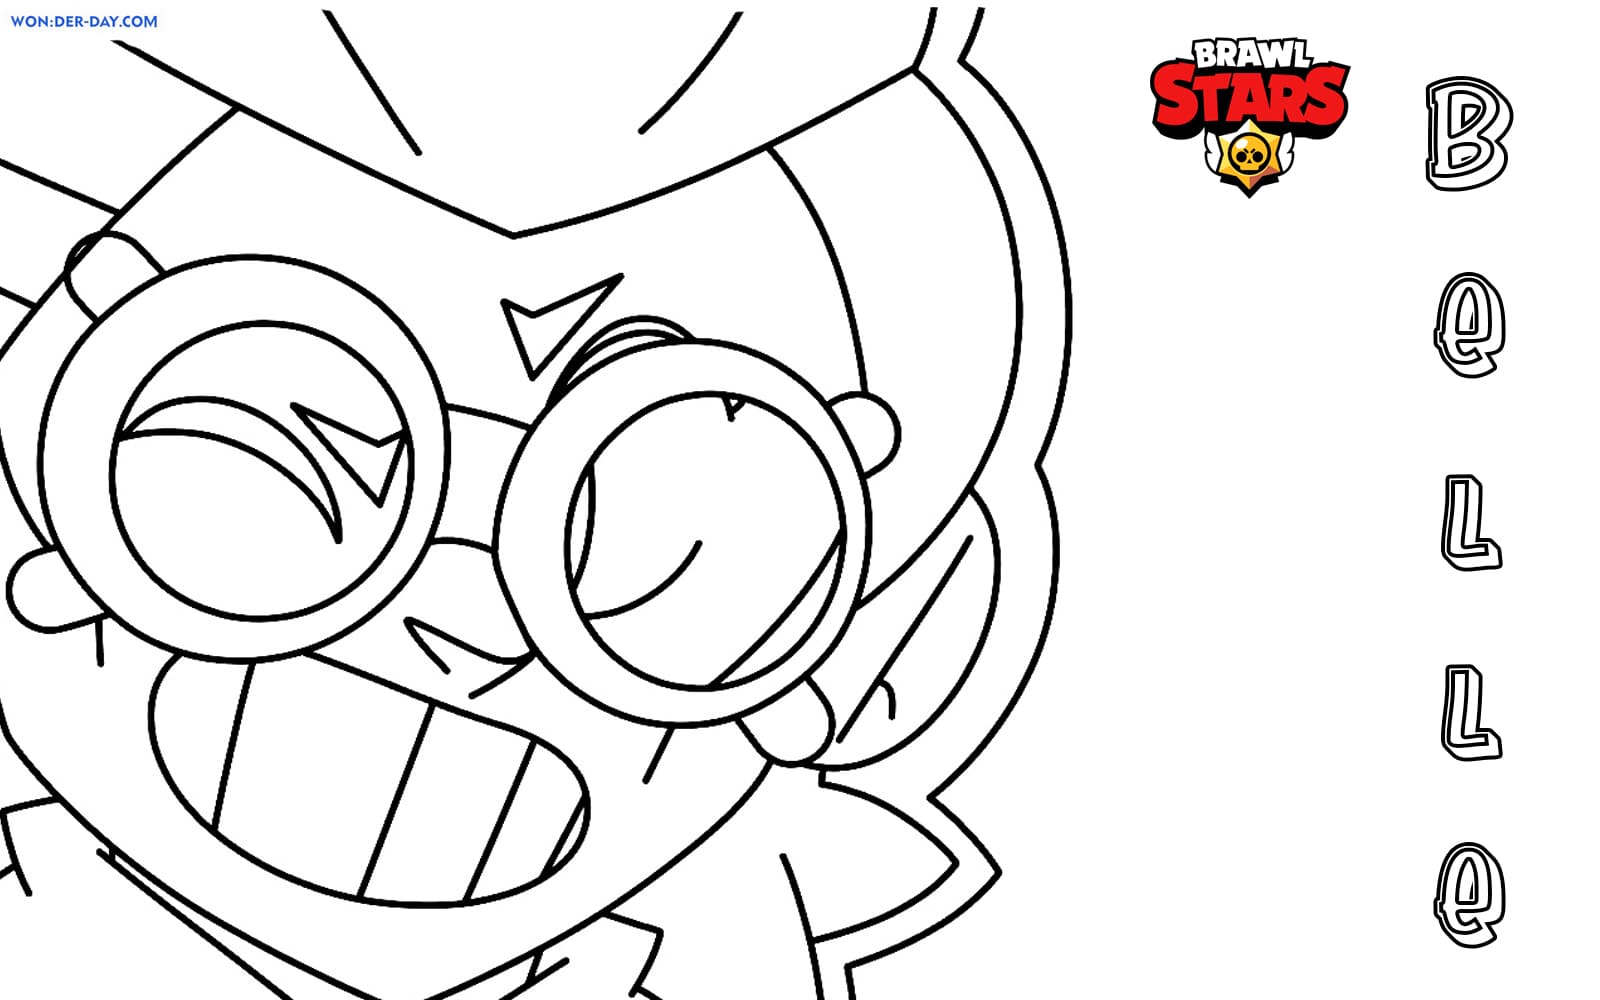 Belle Brawl Stars Coloring Pages Wonder Day Coloring Pages For Children And Adults - para colorir colt brawl stars